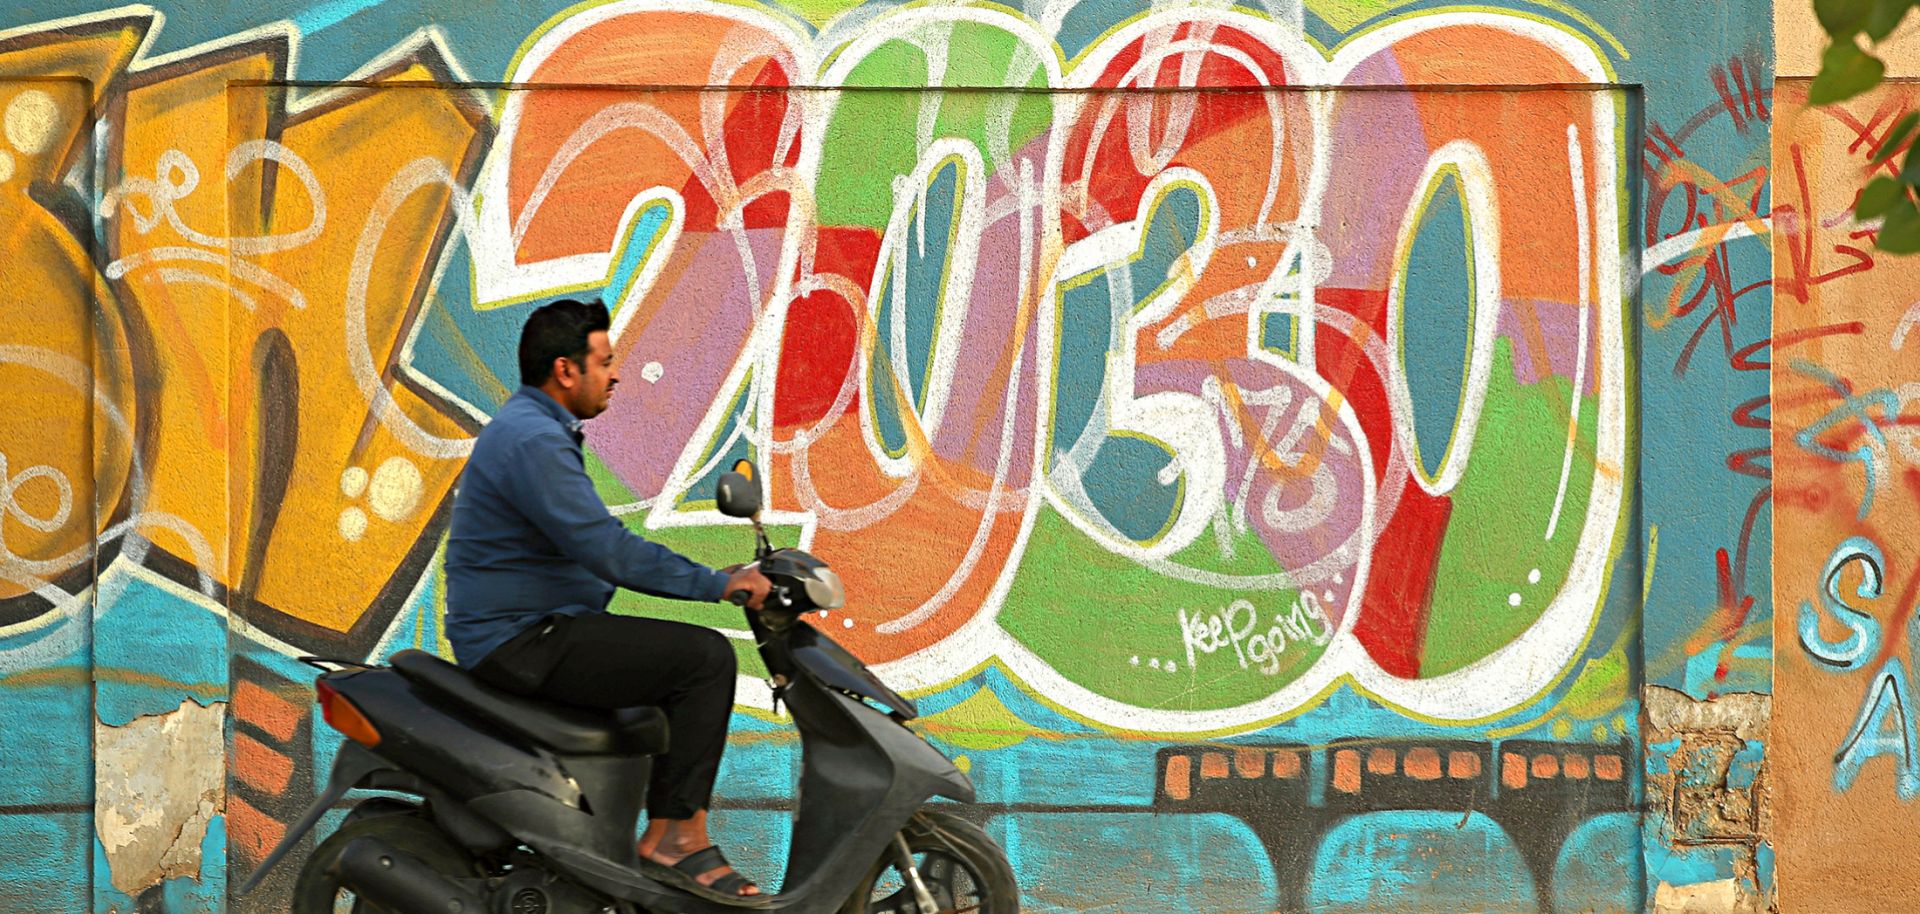 This photo shows a scooter rider passing graffiti alluding to the Saudi Vision 2030 modernization program